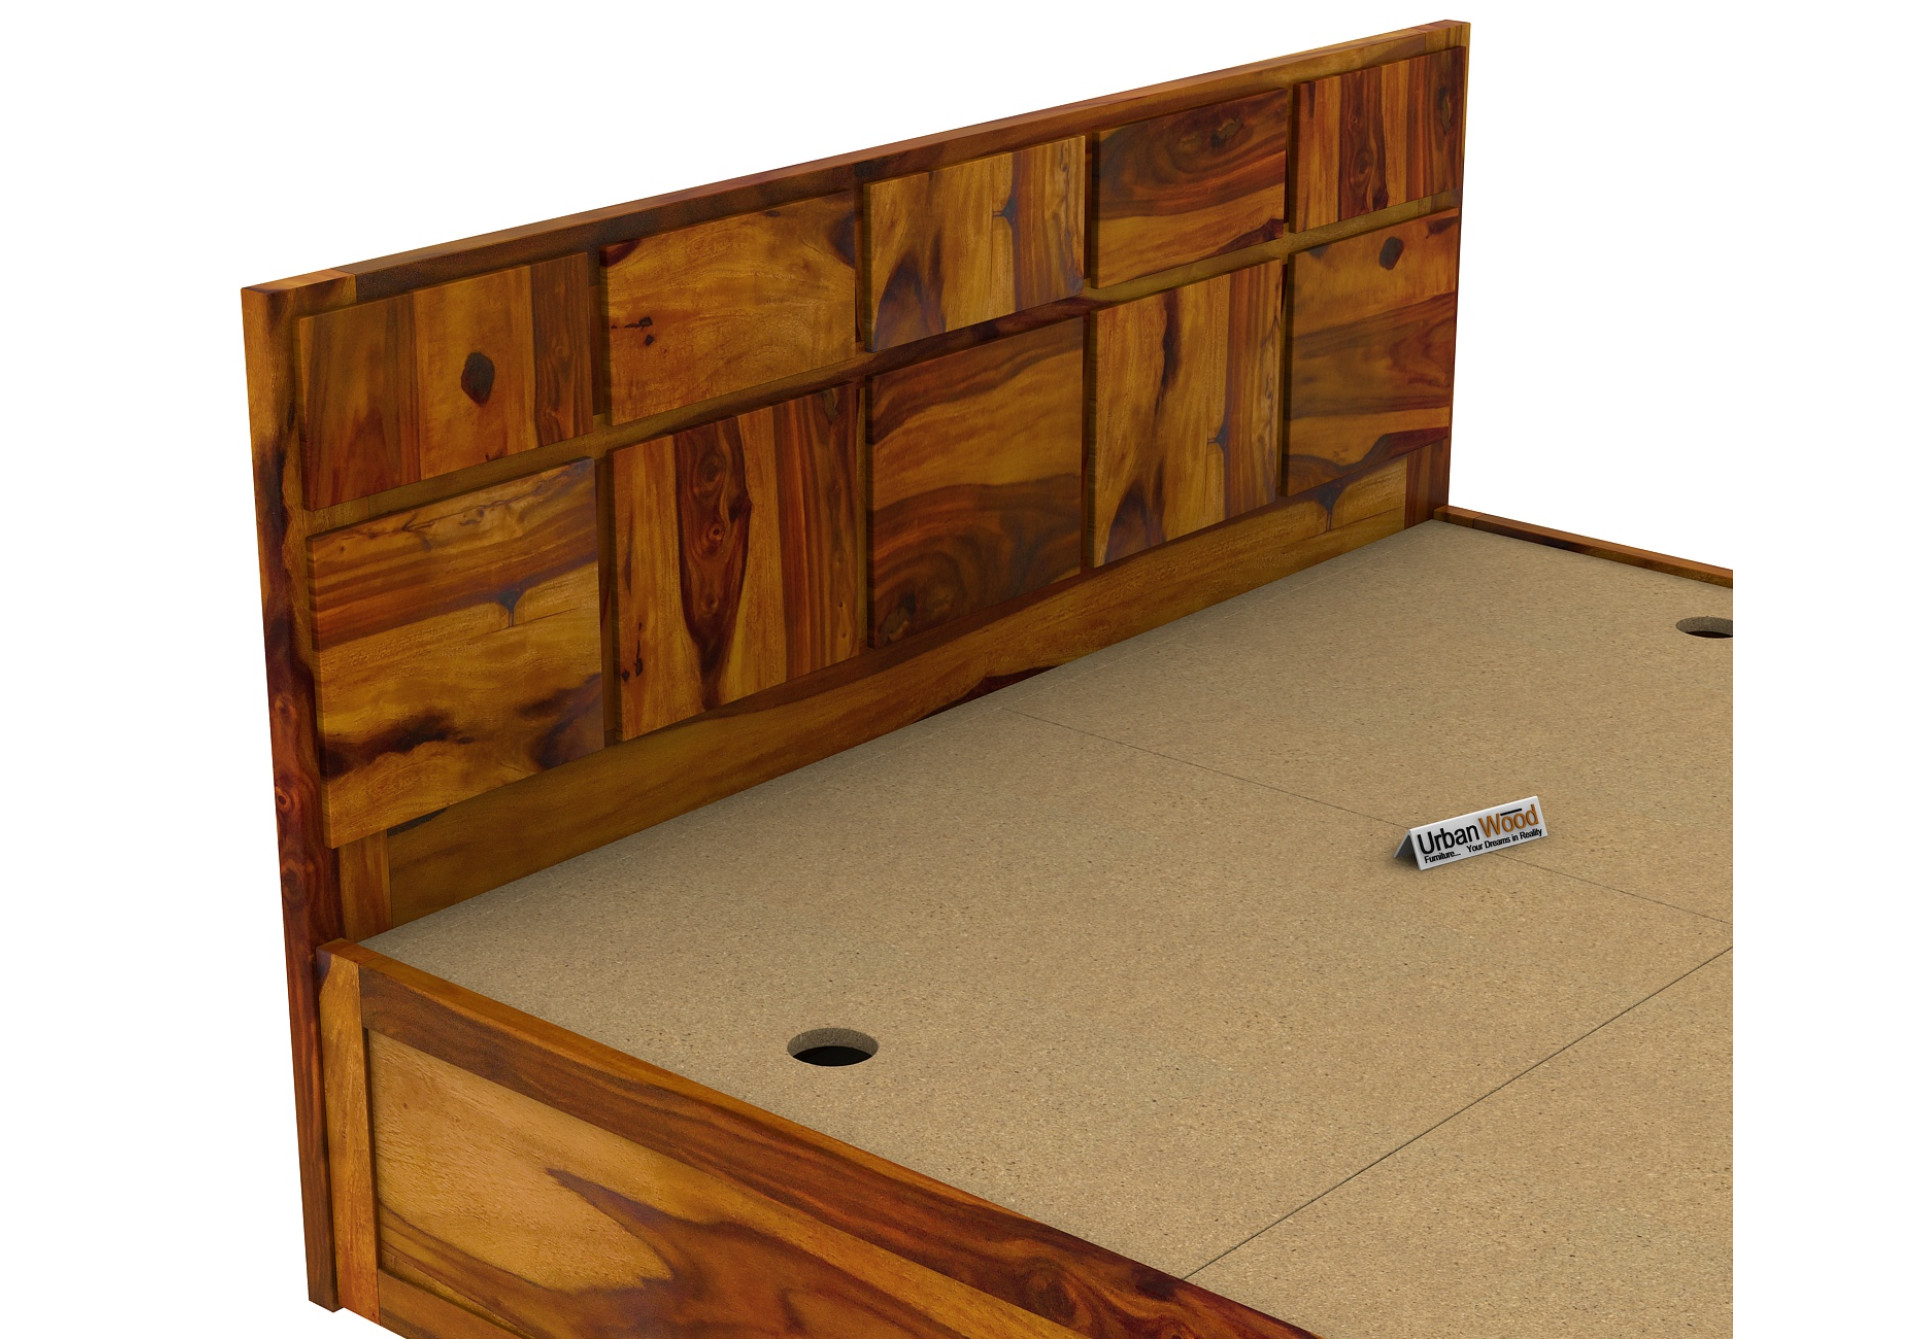 Bedswind Bed With Box Storage ( Queen Size, Honey Finish )